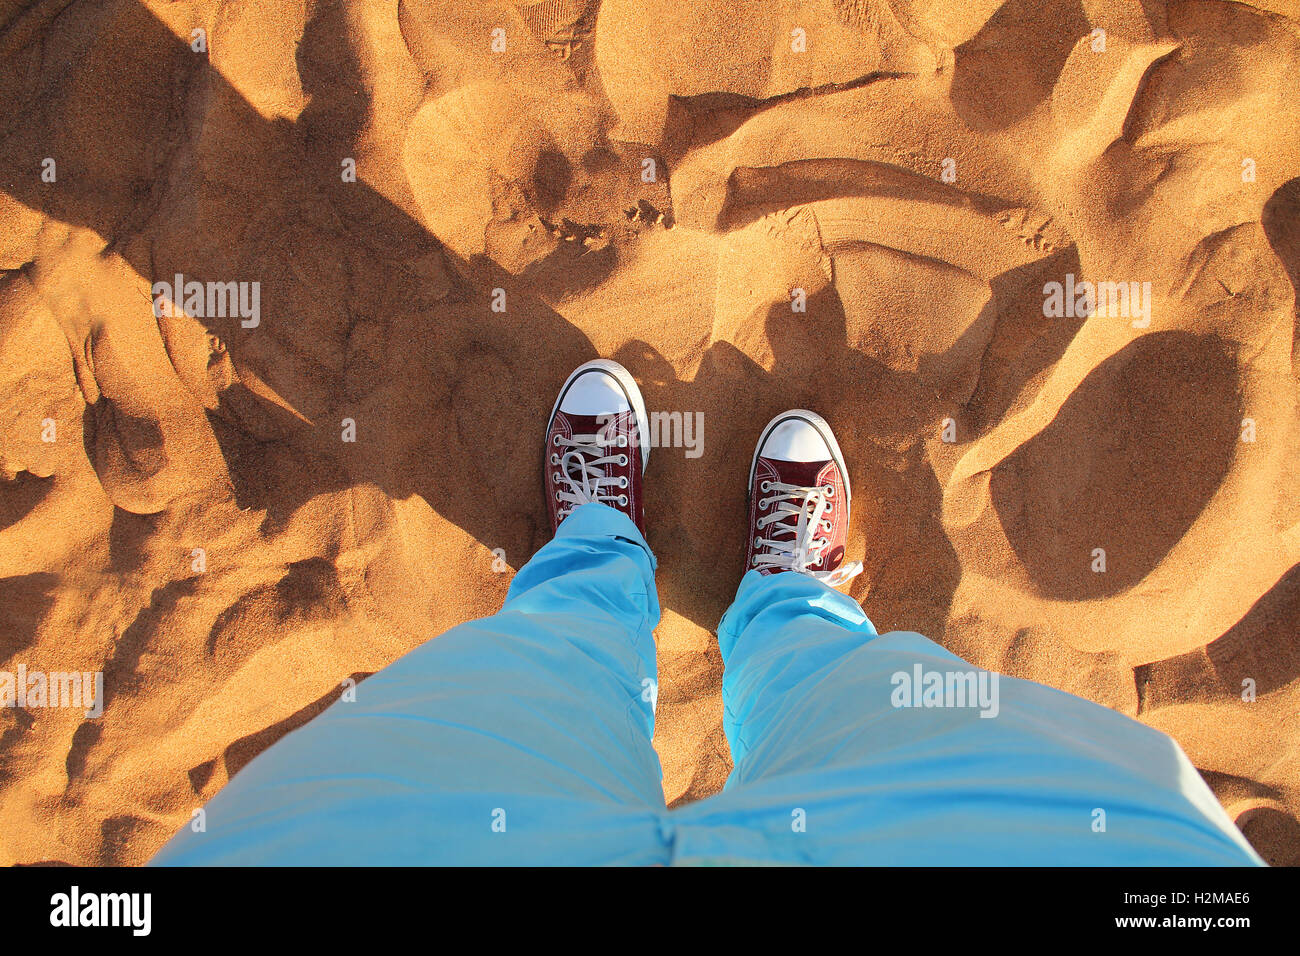 Dubai desert sand close up with read sneakers Stock Photo